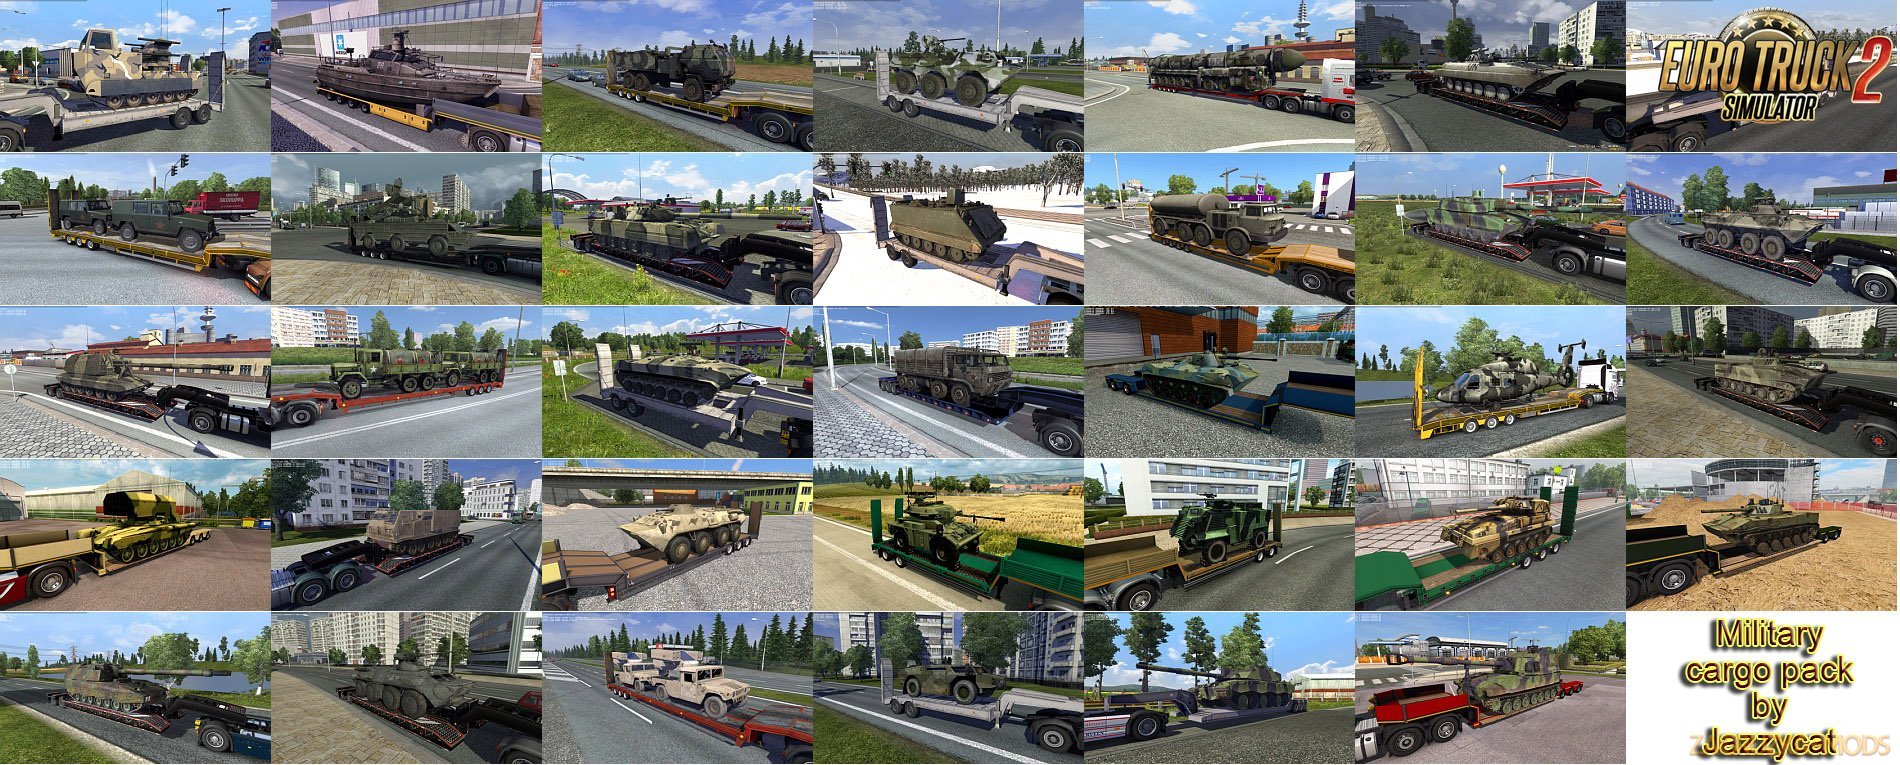 Military Cargo Pack v2.4.1 by Jazzycat